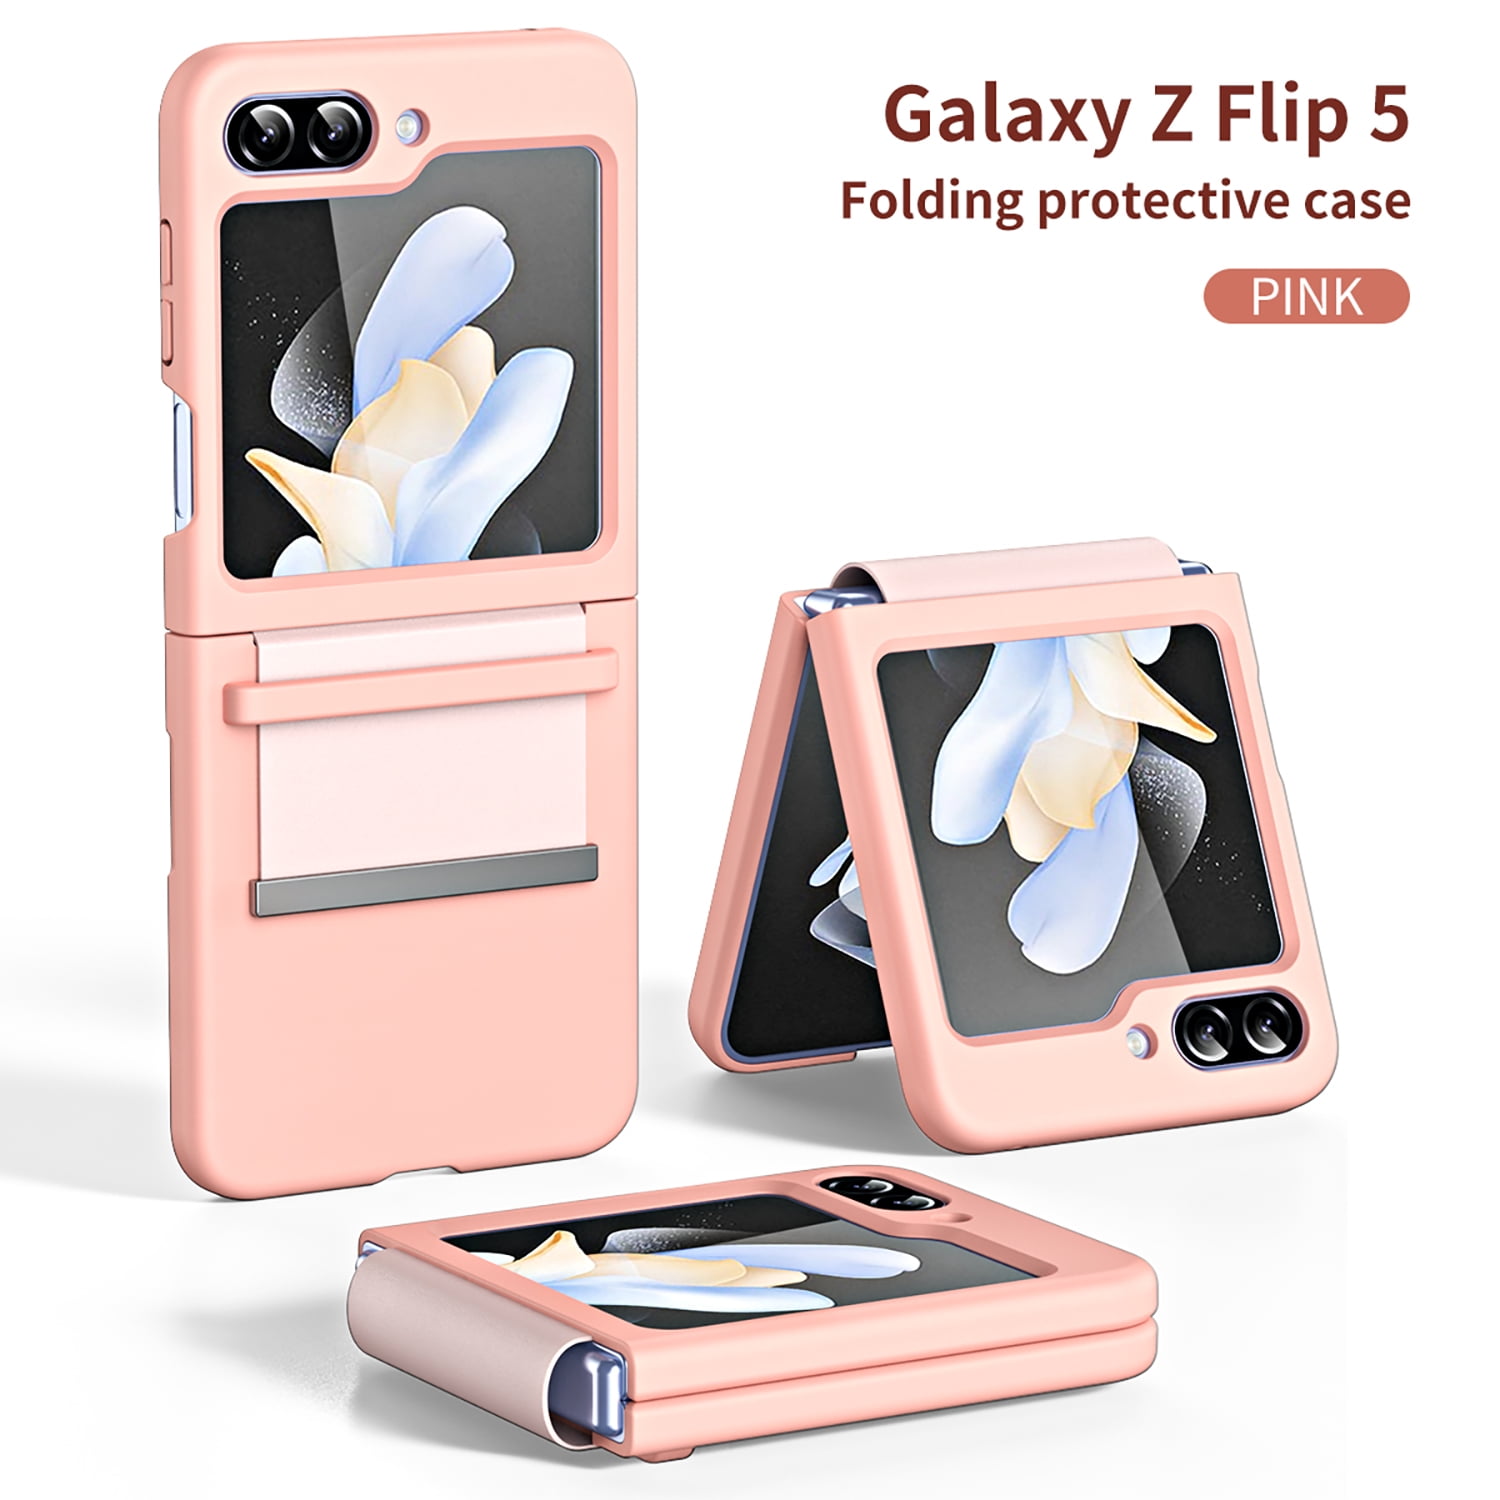 For Samsung Galaxy Z Flip 5 Case with Hinge Protection Funda for Samsung Z  Flip 5 Leveling Hinge Case Fashion Plating Cover - AliExpress